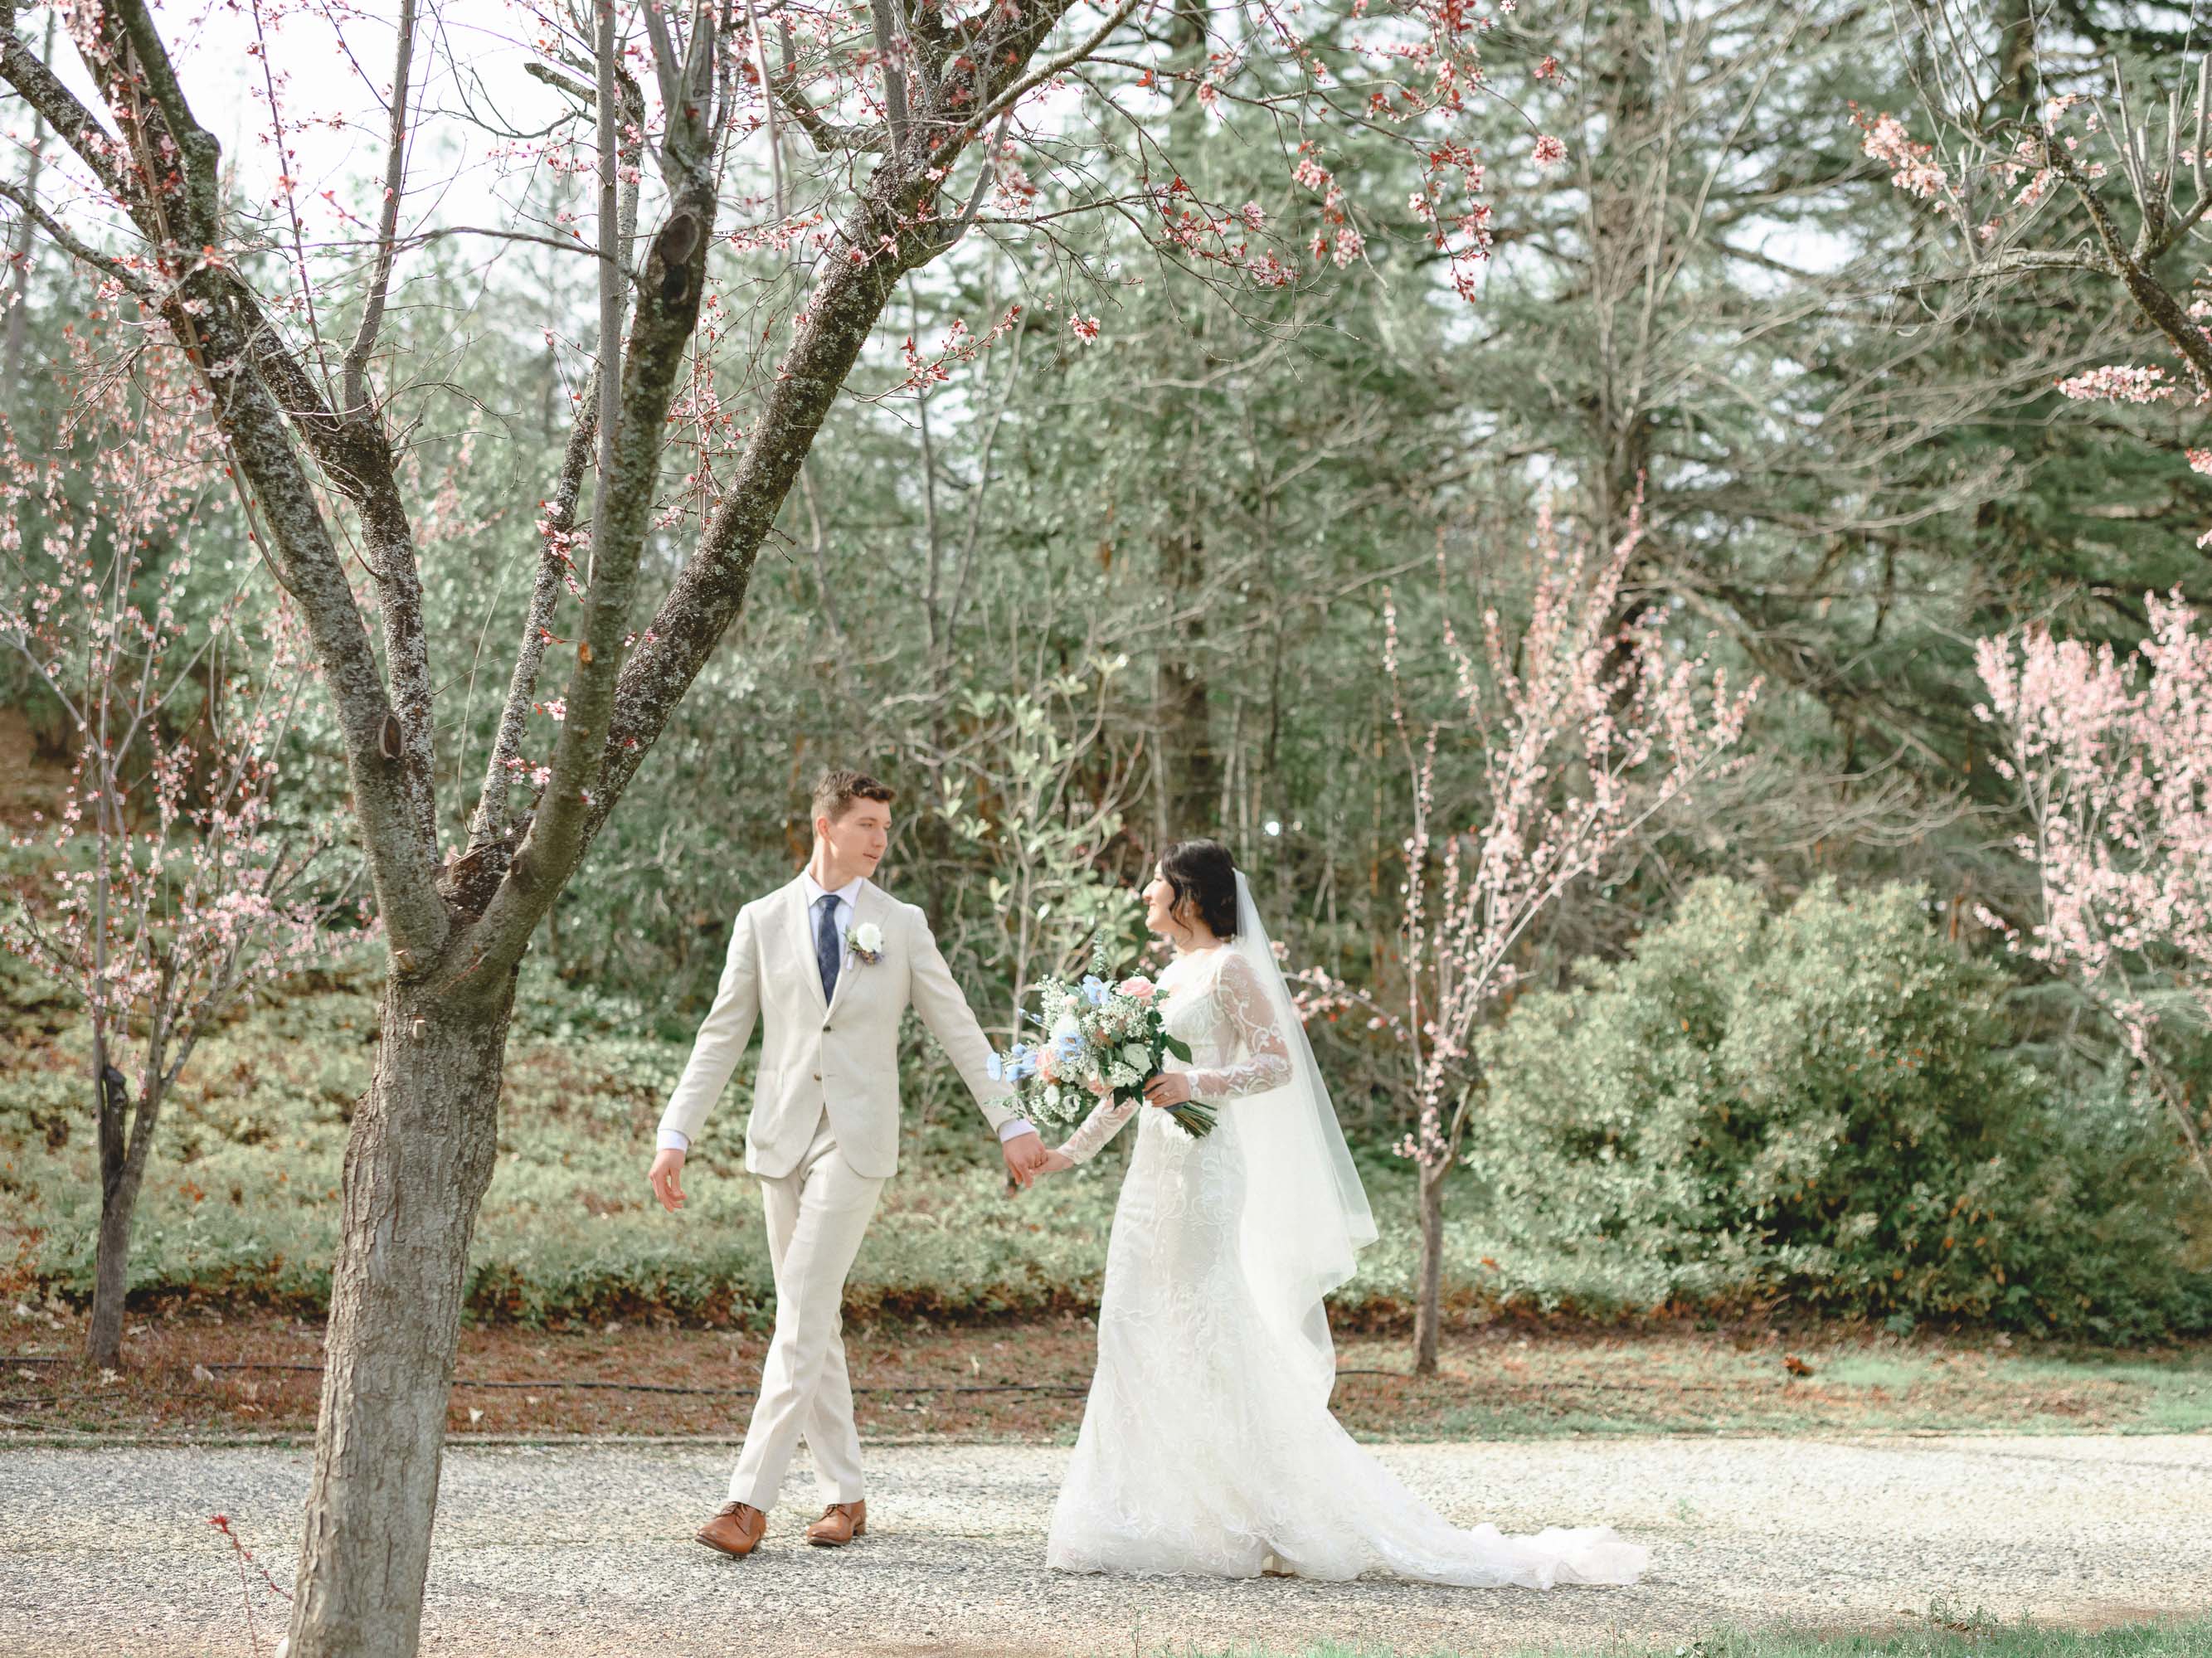 A bride and groom walking down a path with blossoming trees.